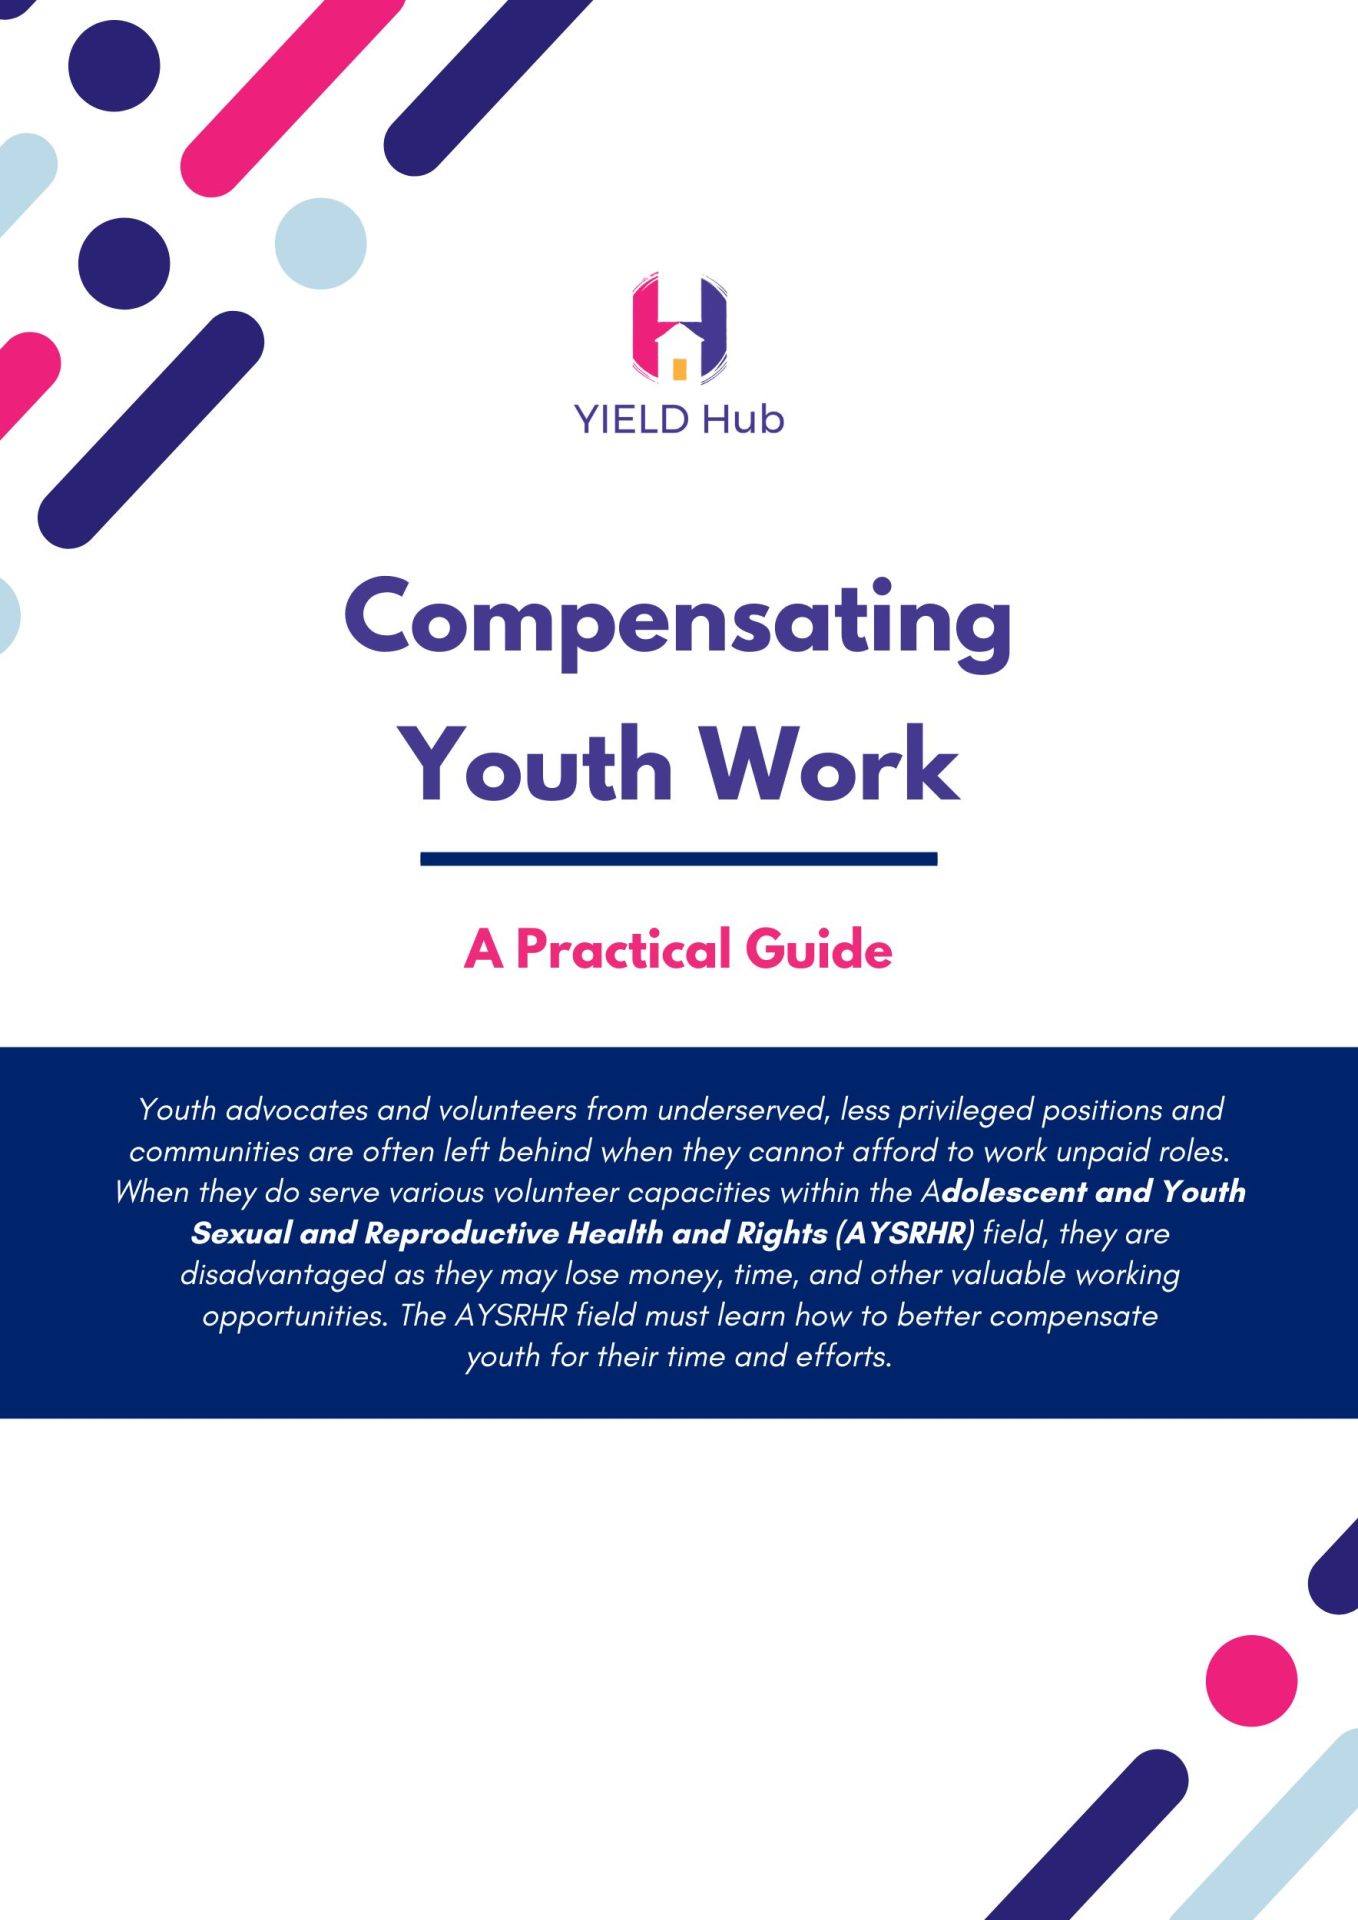 A Practical Guide on Compensating Youth Work